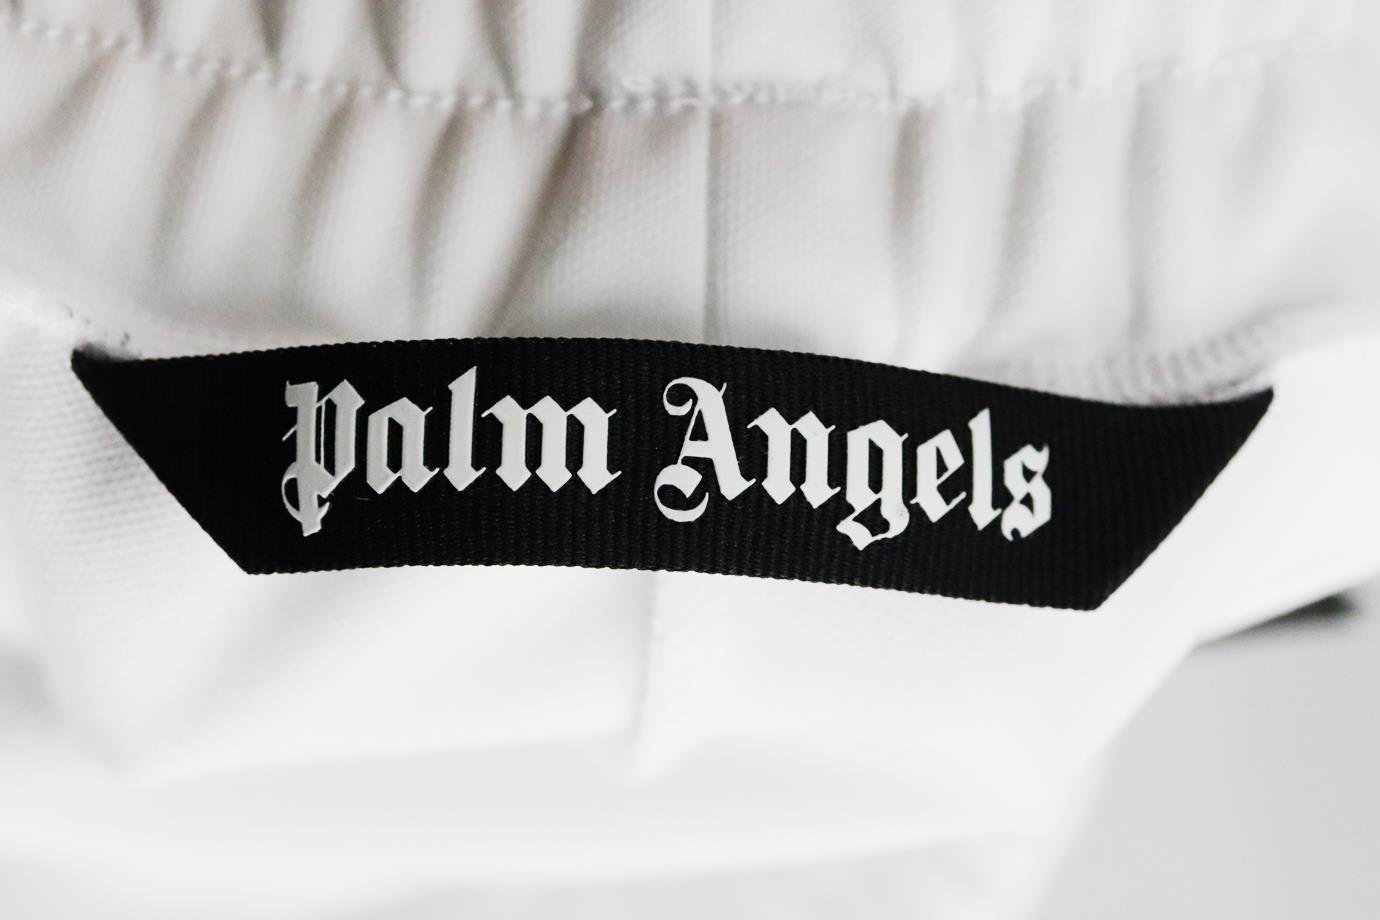 PALM ANGELS STRIPED JERSEY TRACK PANTS XLARGE